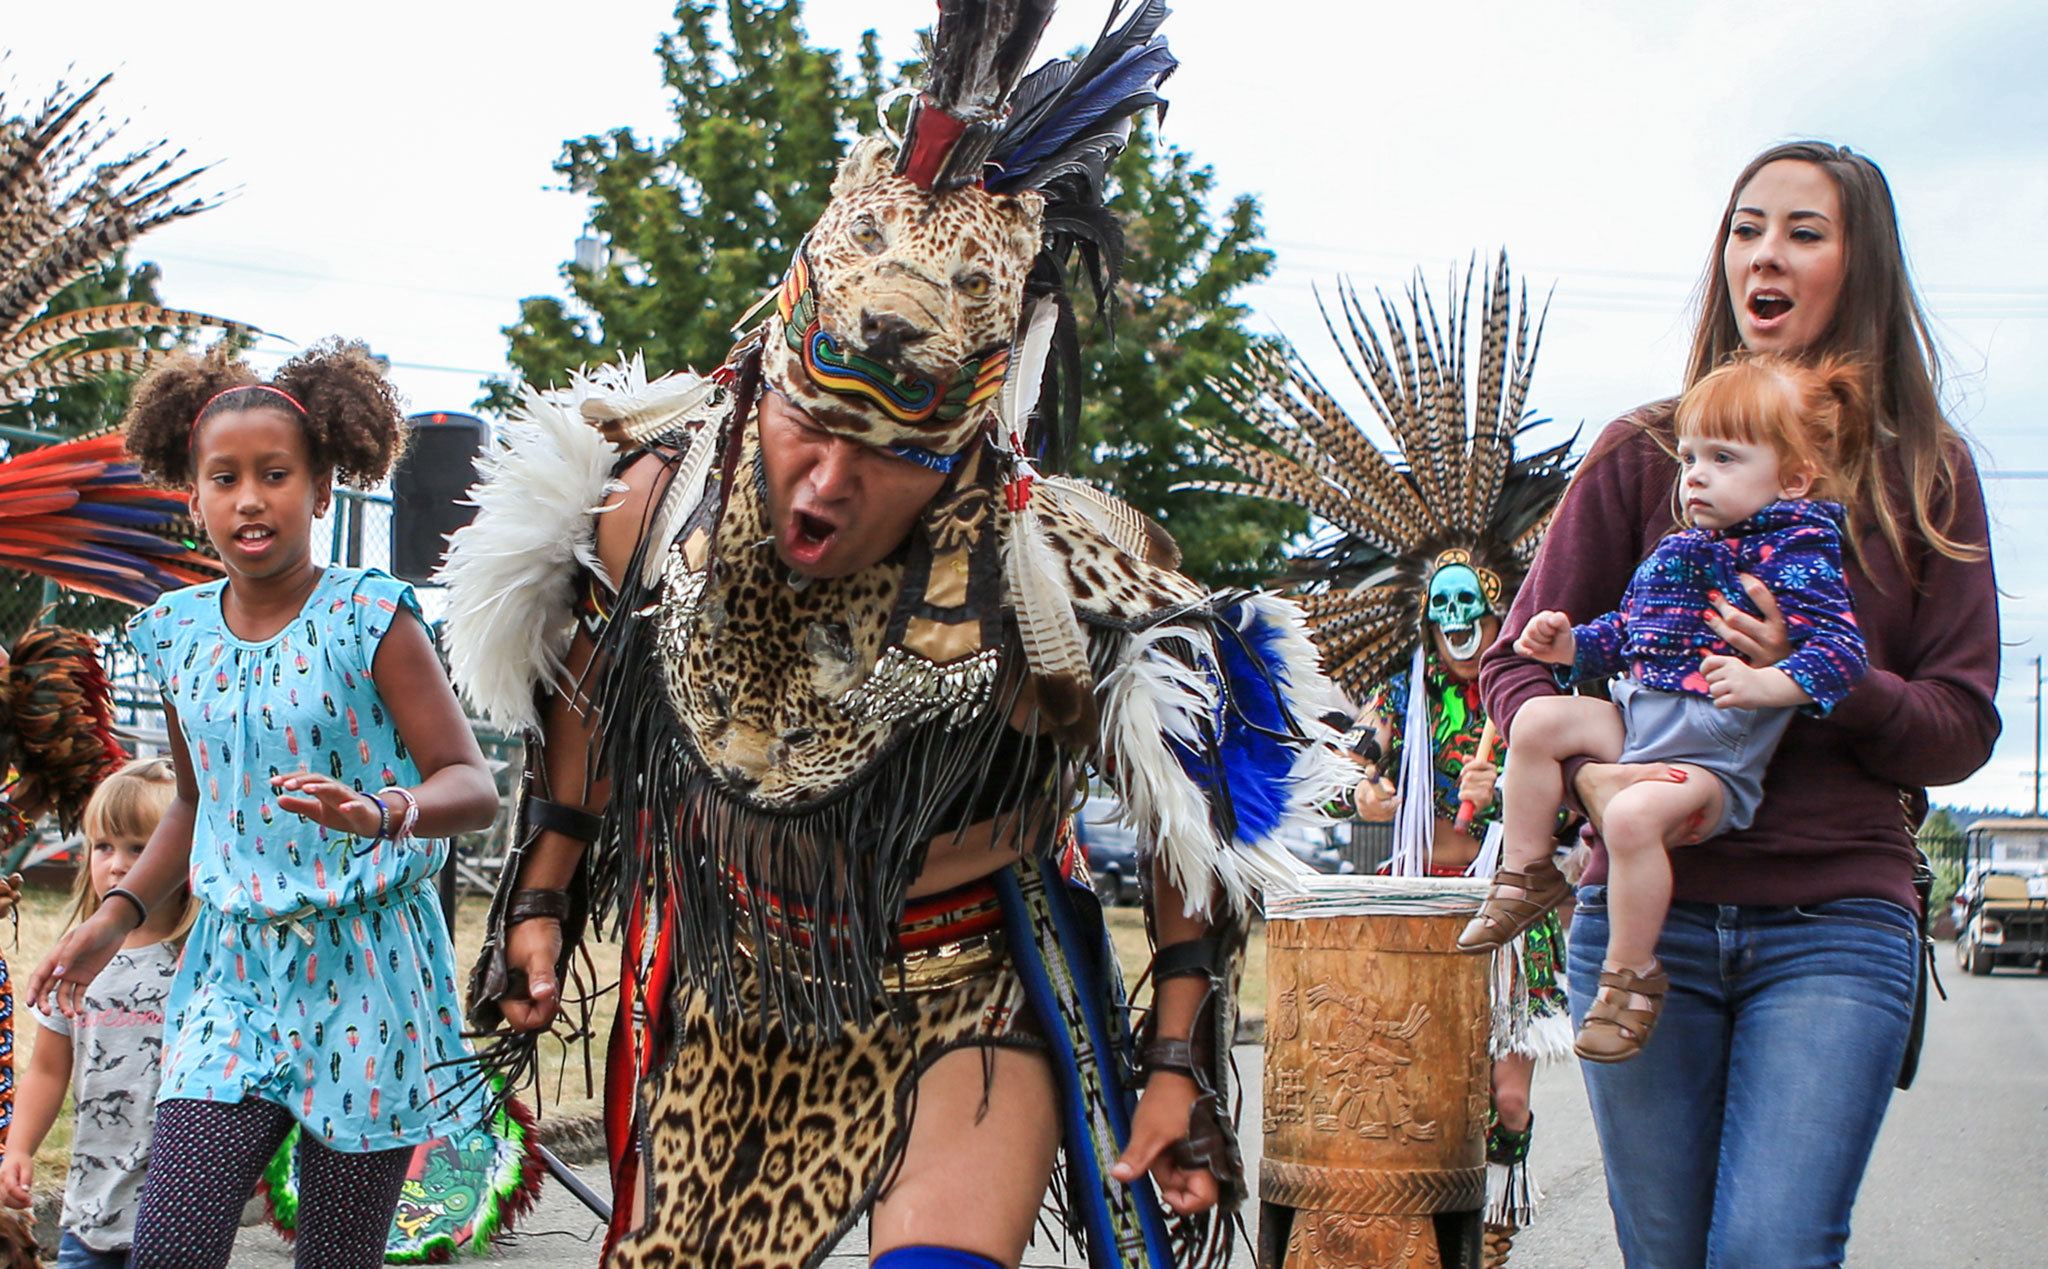 Jose Salinas, center, leads an Aztec Indian dance with Kiana Kypreos. left, and Kerry Wood holding Sophia Wood, right, following along Saturday afternoon during the annual Evergreen State Fair in Monroe. The 12-day fair runs through Labor Day and is one of the largest events held in the Pacific Northwest. (Kevin Clark / The Herald)